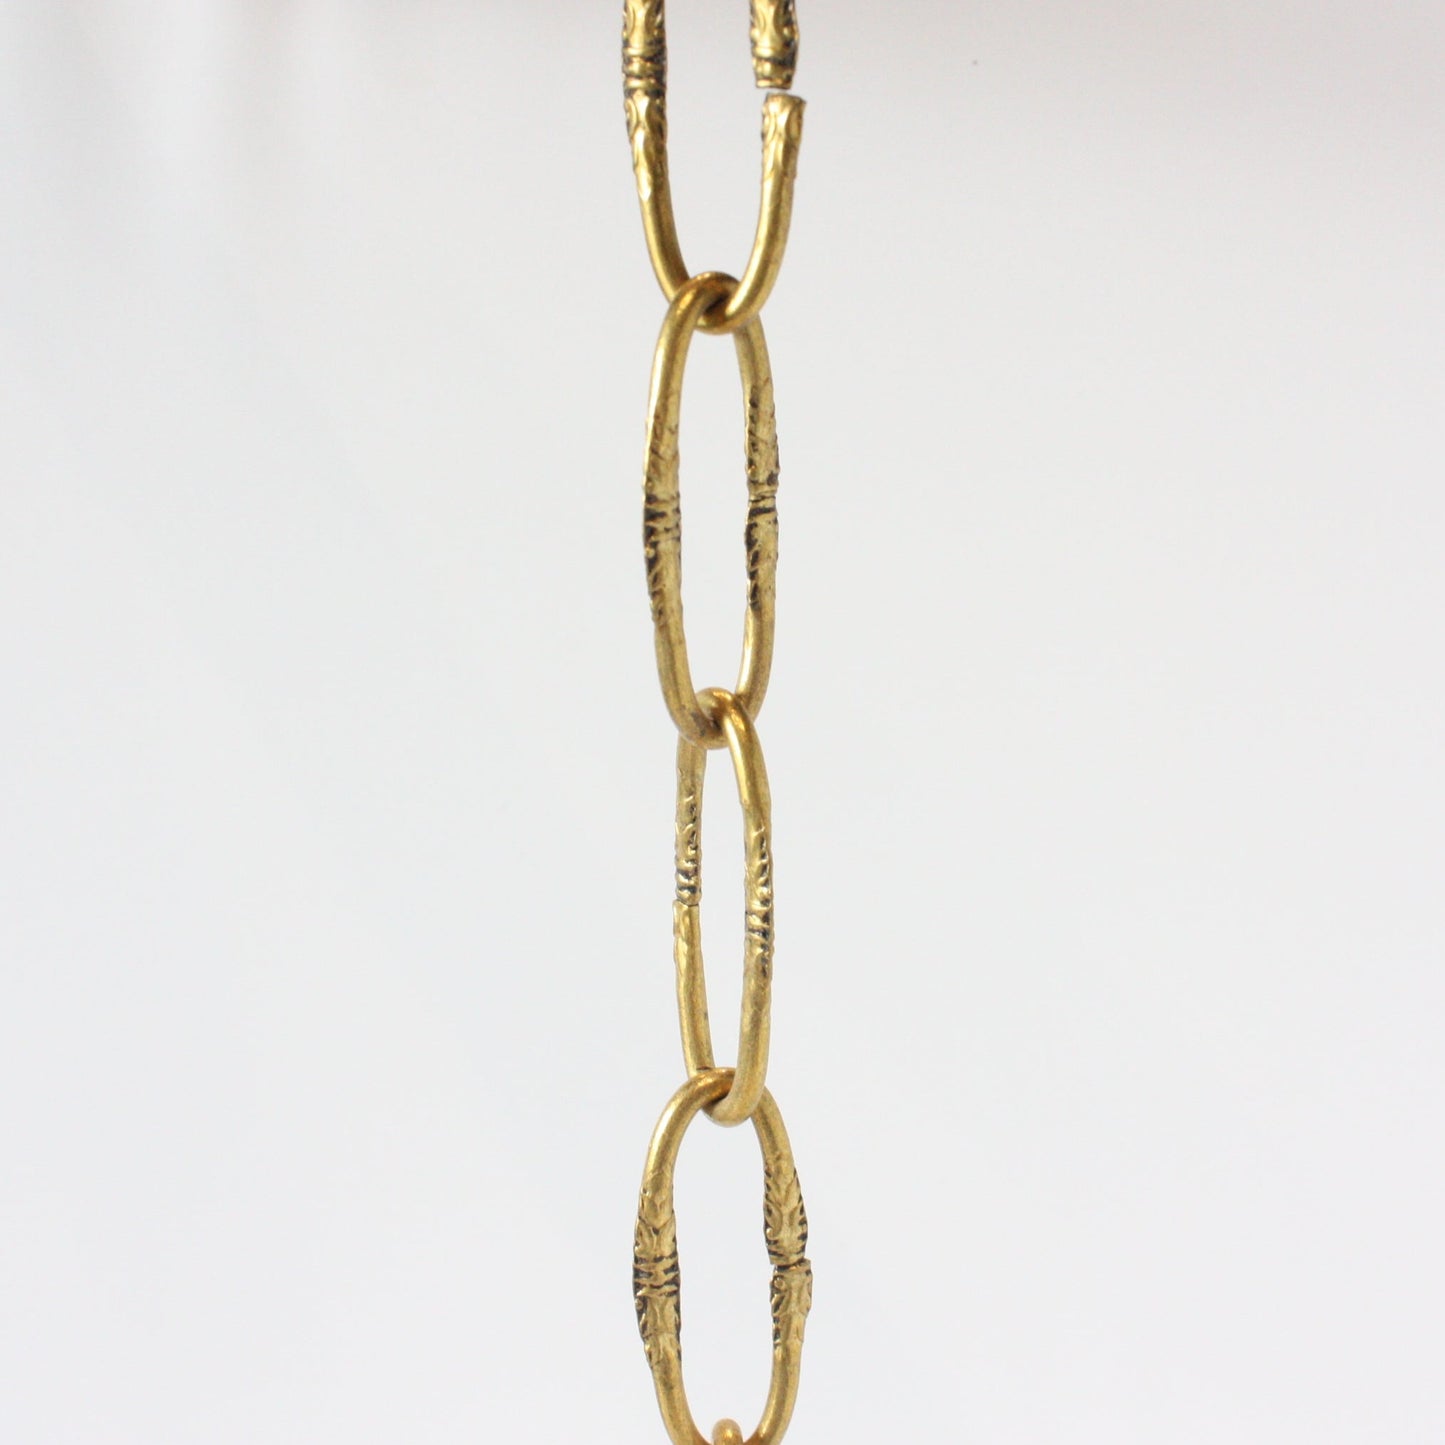 Patterned Brass Plated Spanish Iron Chain, 3 Feet